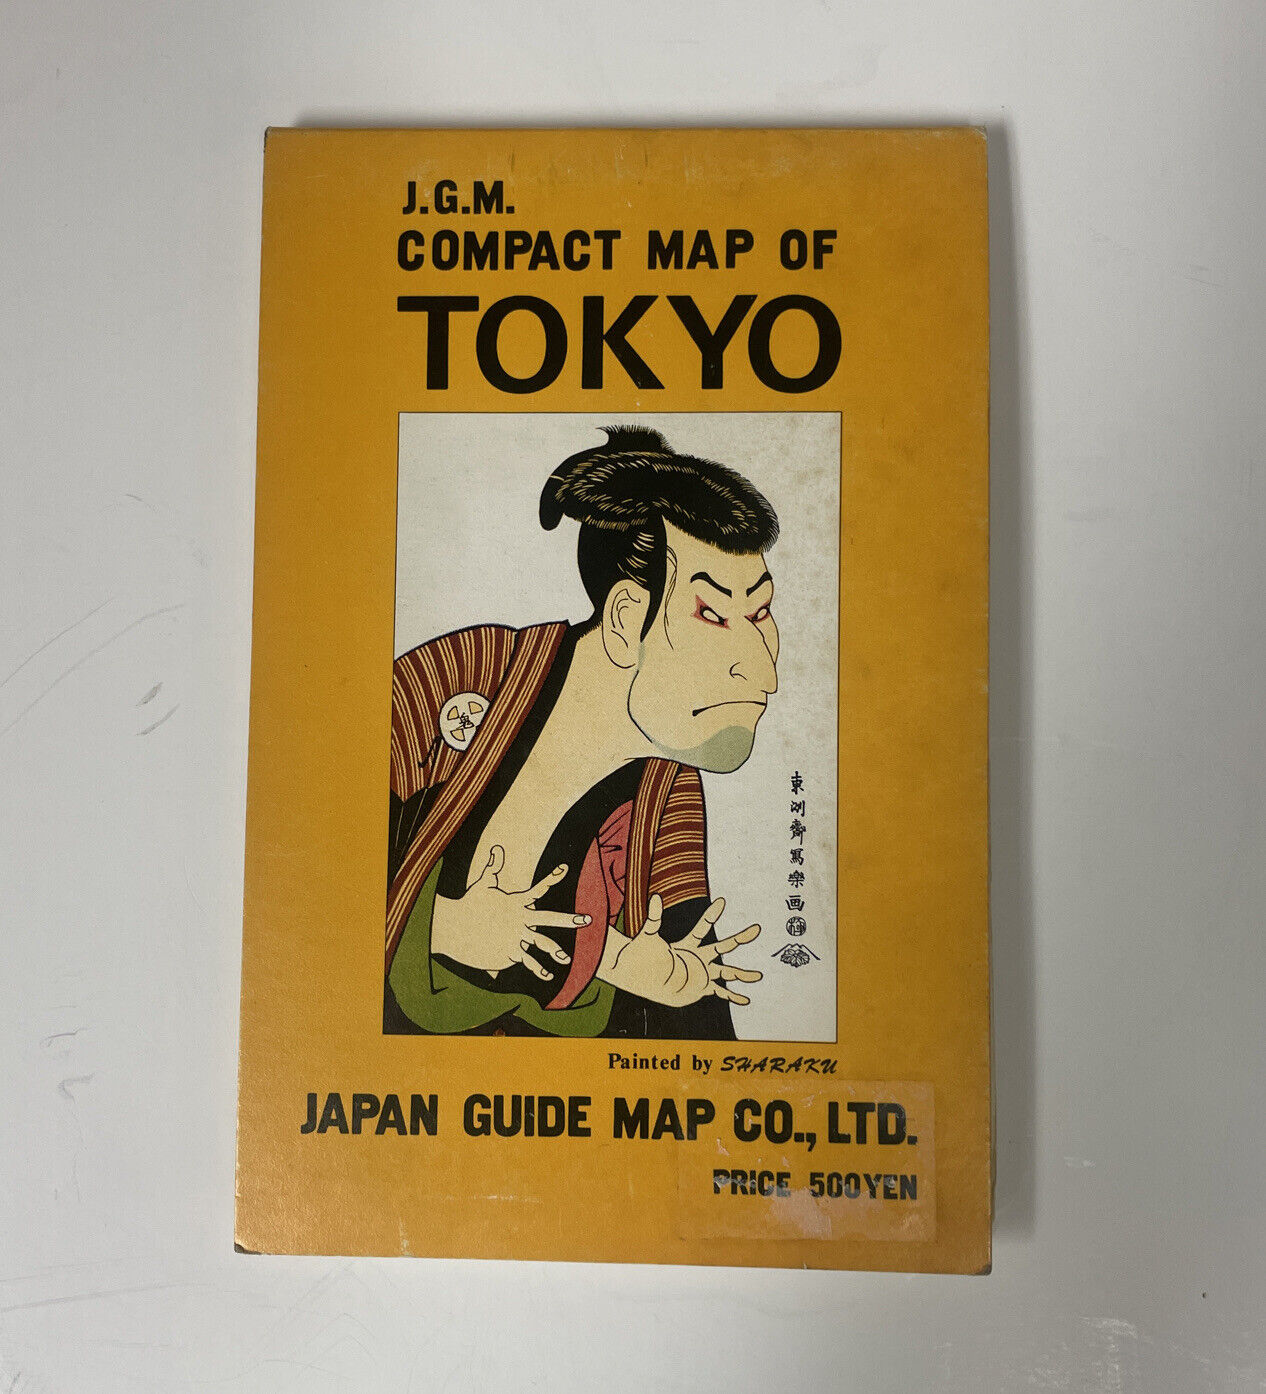 J.G.M. Compact Map of Tokyo